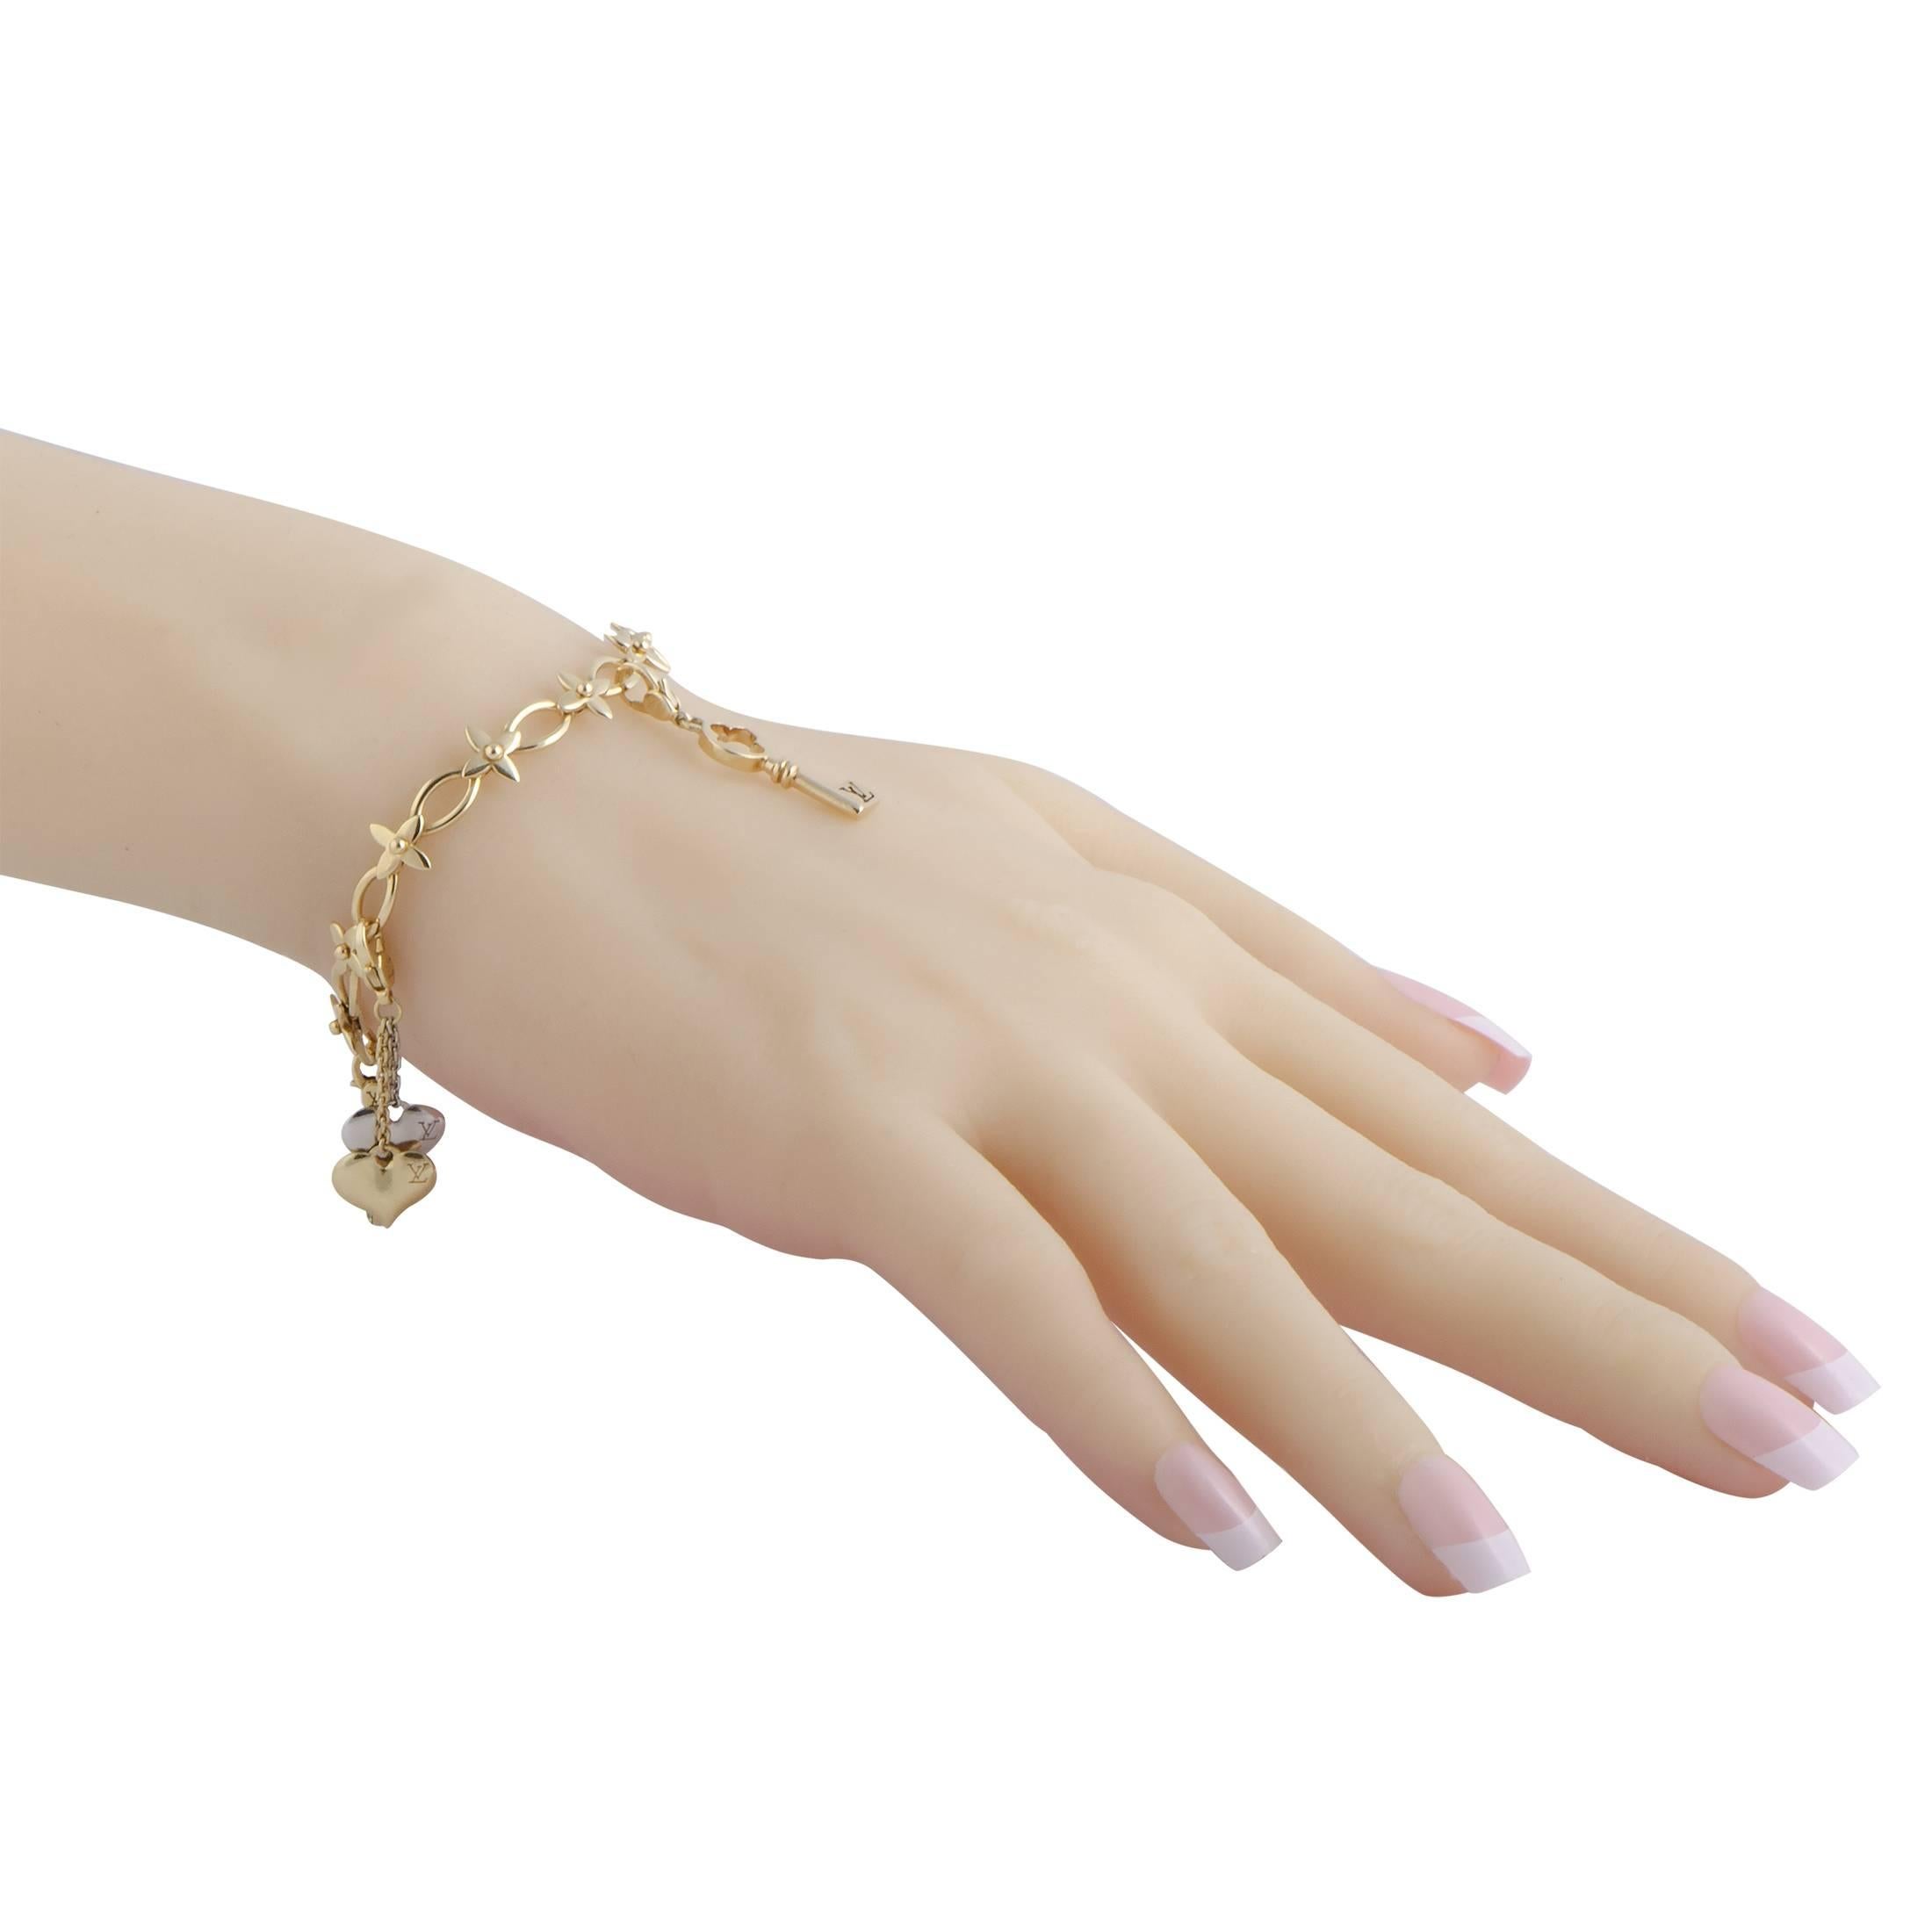 This gorgeous bracelet perfectly captures the spirit of Louis Vuitton designs, offering a look of timeless elegance and refinement. The bracelet is made of classic 18K yellow gold and embellished with diamond and peridot stones. 
